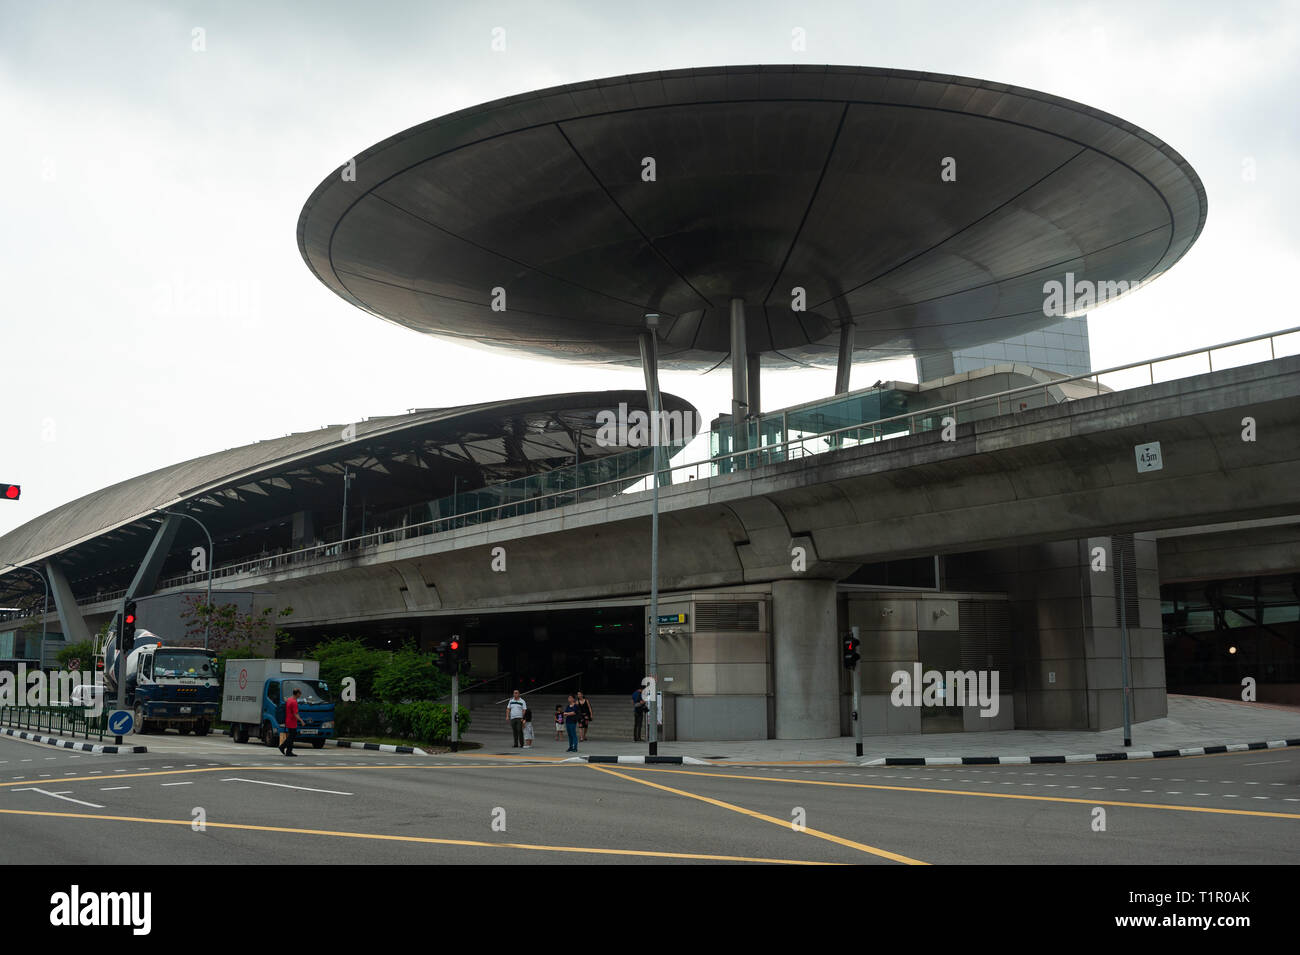 22.03.2019, Singapore, Republic of Singapore, Asia - Exterior view of the Expo station along the MRT network designed by Sir Norman Foster. Stock Photo